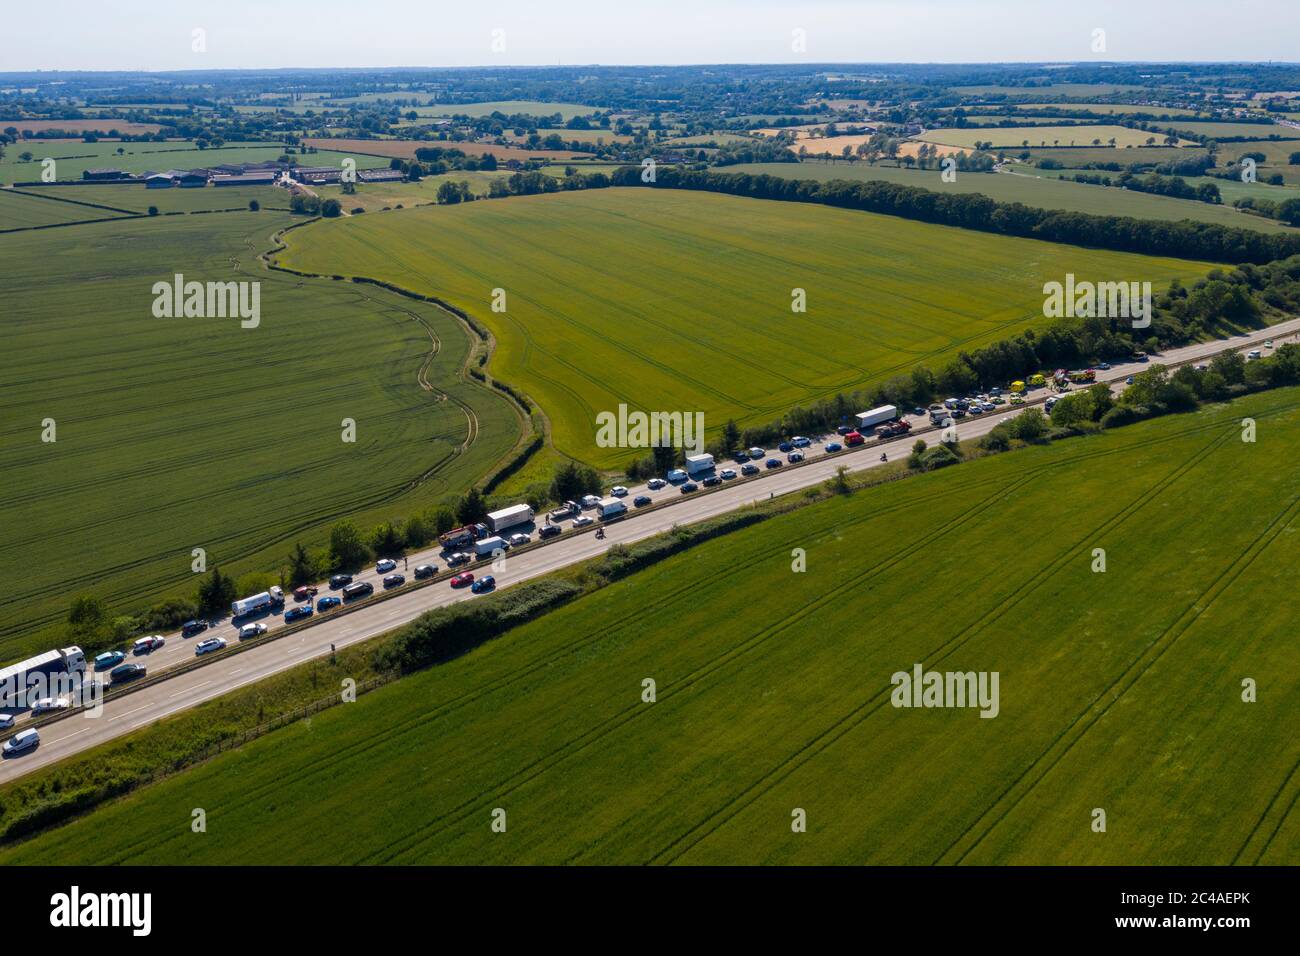 Essex, UK. Accident shuts A12 between junctions 16 and 16 causing huge tailbacks. A car appears to have struck the central reservation. Emergency services are on scene. Ricci Fothergill/Alamy Live News Stock Photo